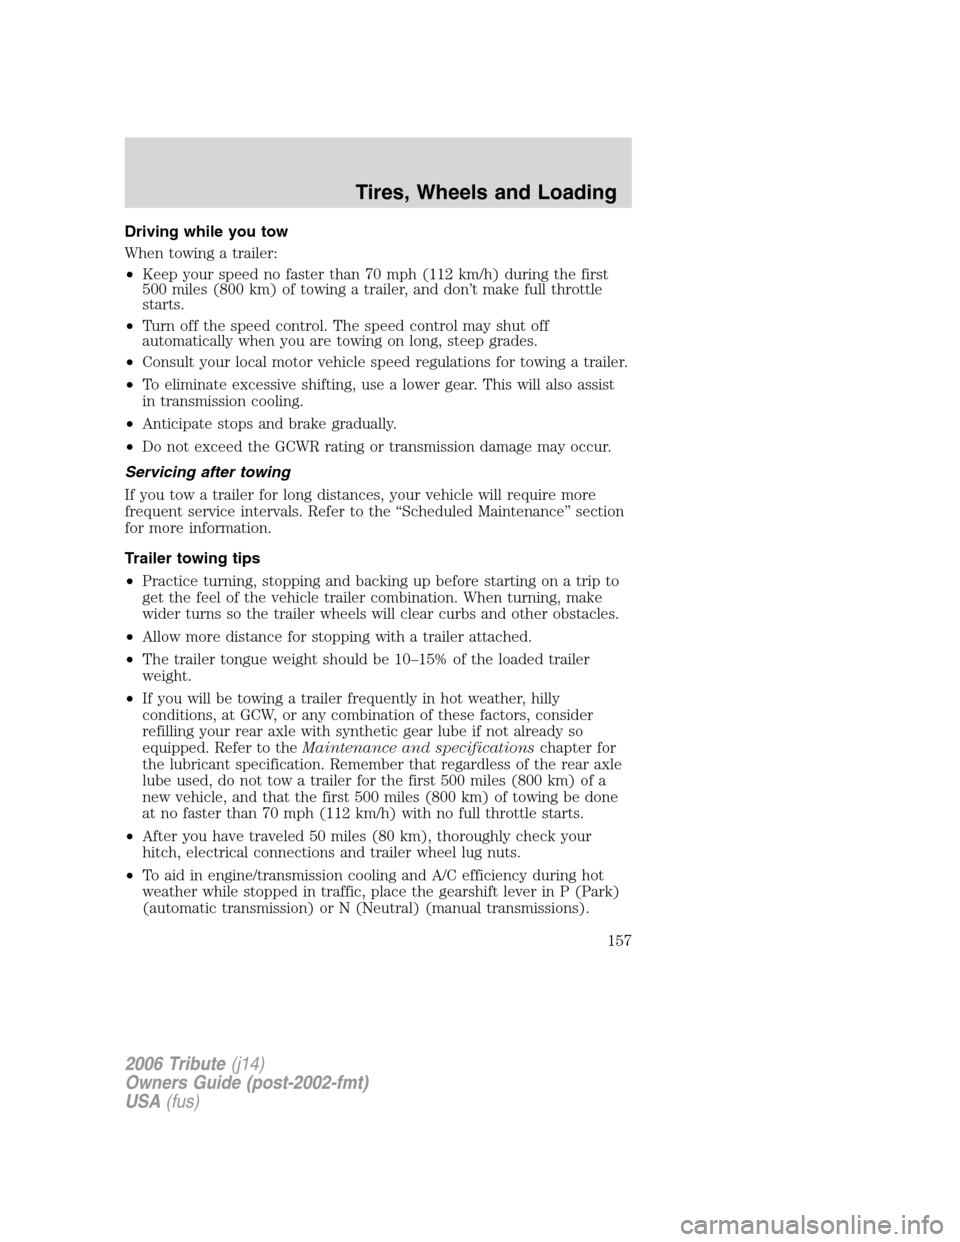 MAZDA MODEL TRIBUTE 2006  Owners Manual (in English) Driving while you tow
When towing a trailer:
•Keep your speed no faster than 70 mph (112 km/h) during the first
500 miles (800 km) of towing a trailer, and don’t make full throttle
starts.
•Turn